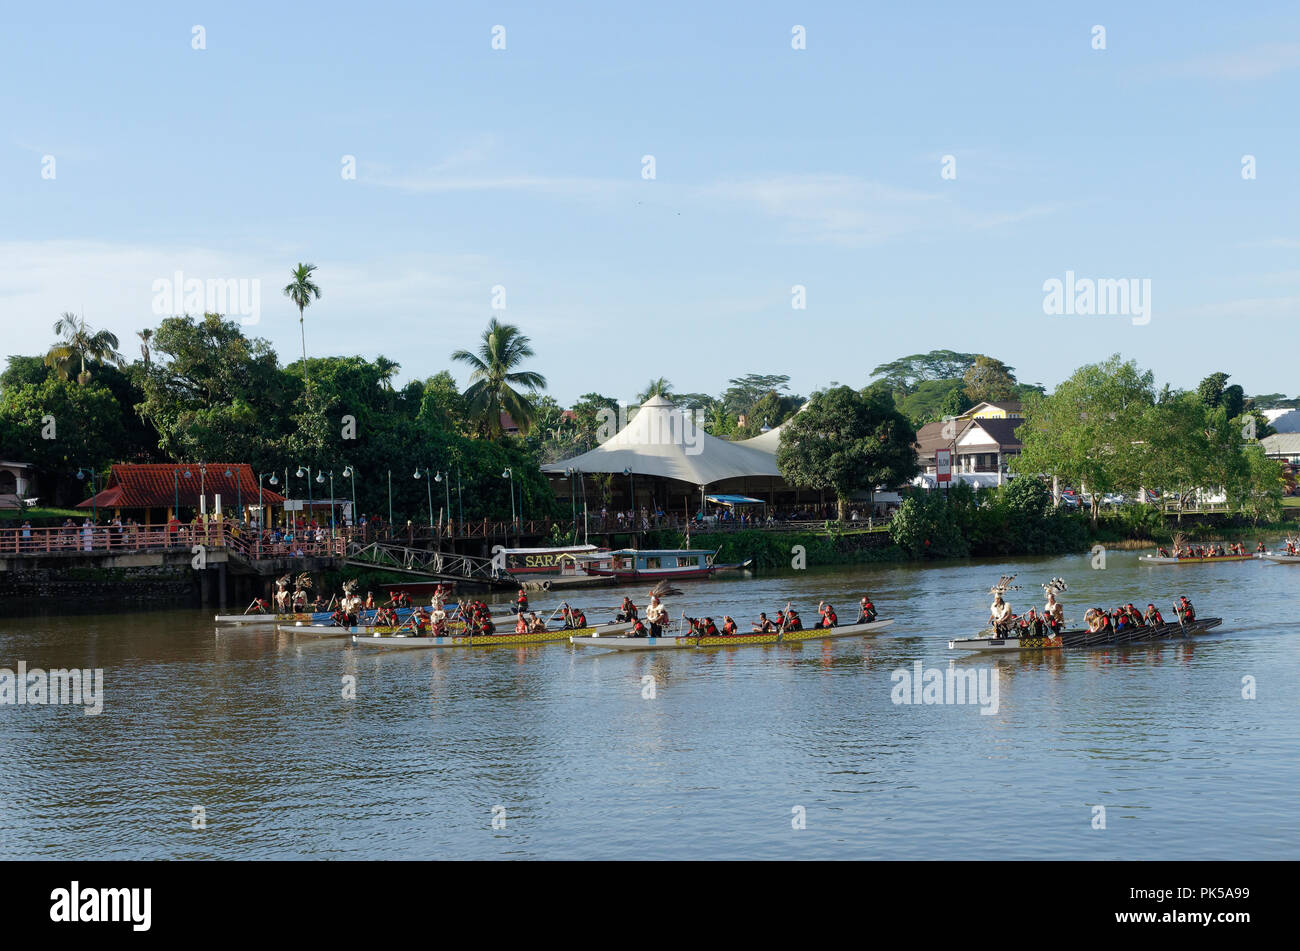 Kuching, Sarawak river, boats with natives in traditional dress form part of the Gawai day parade and celebration Stock Photo